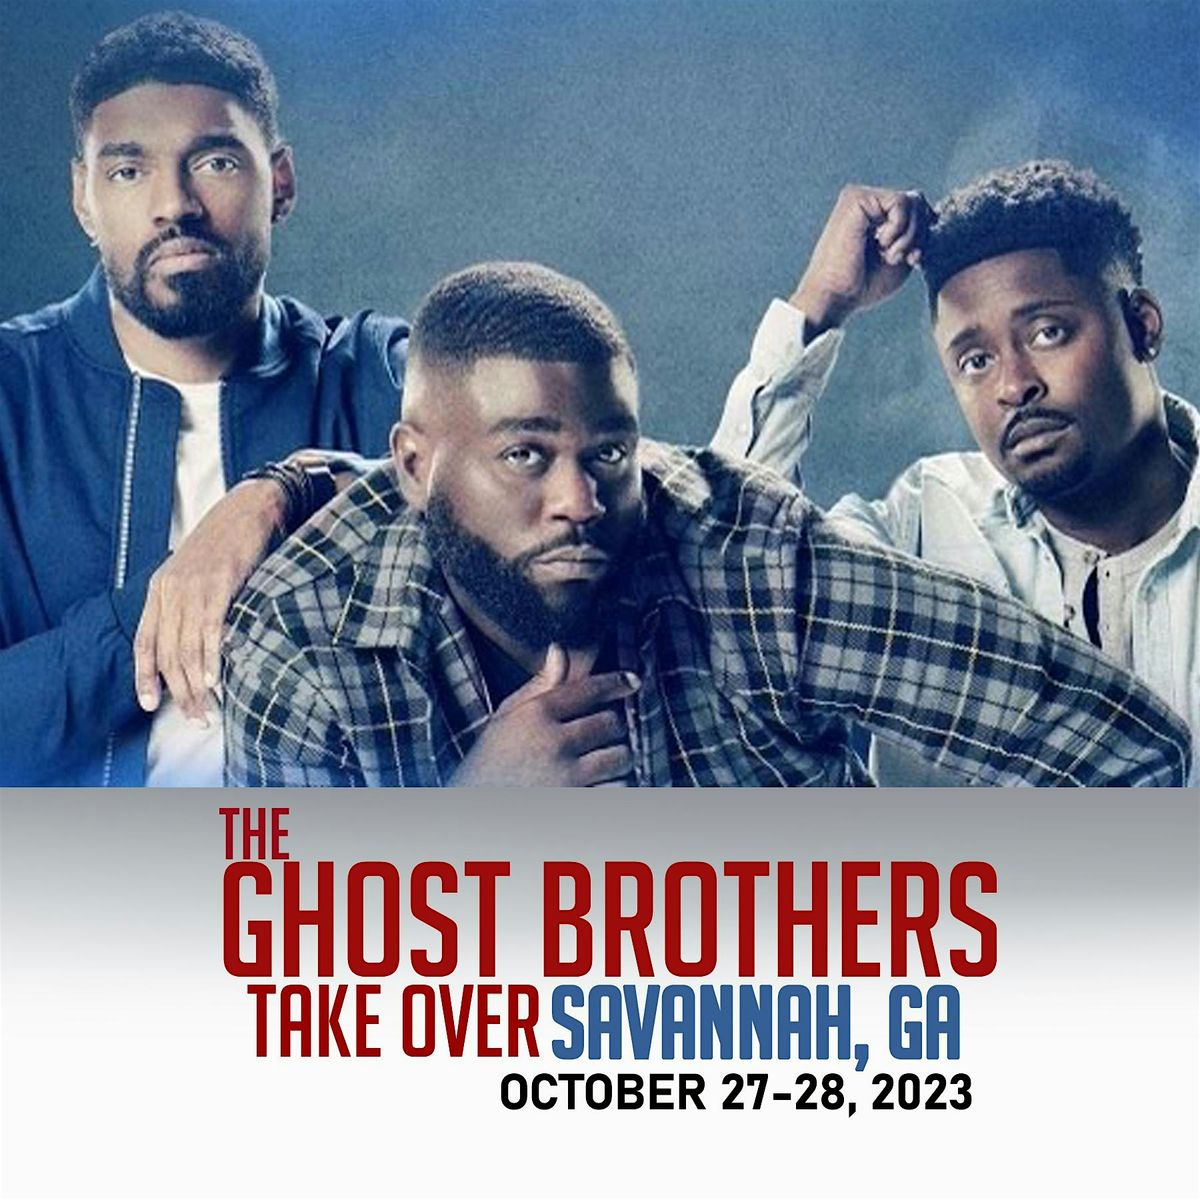 The Ghost Brothers Takeover Savannah!